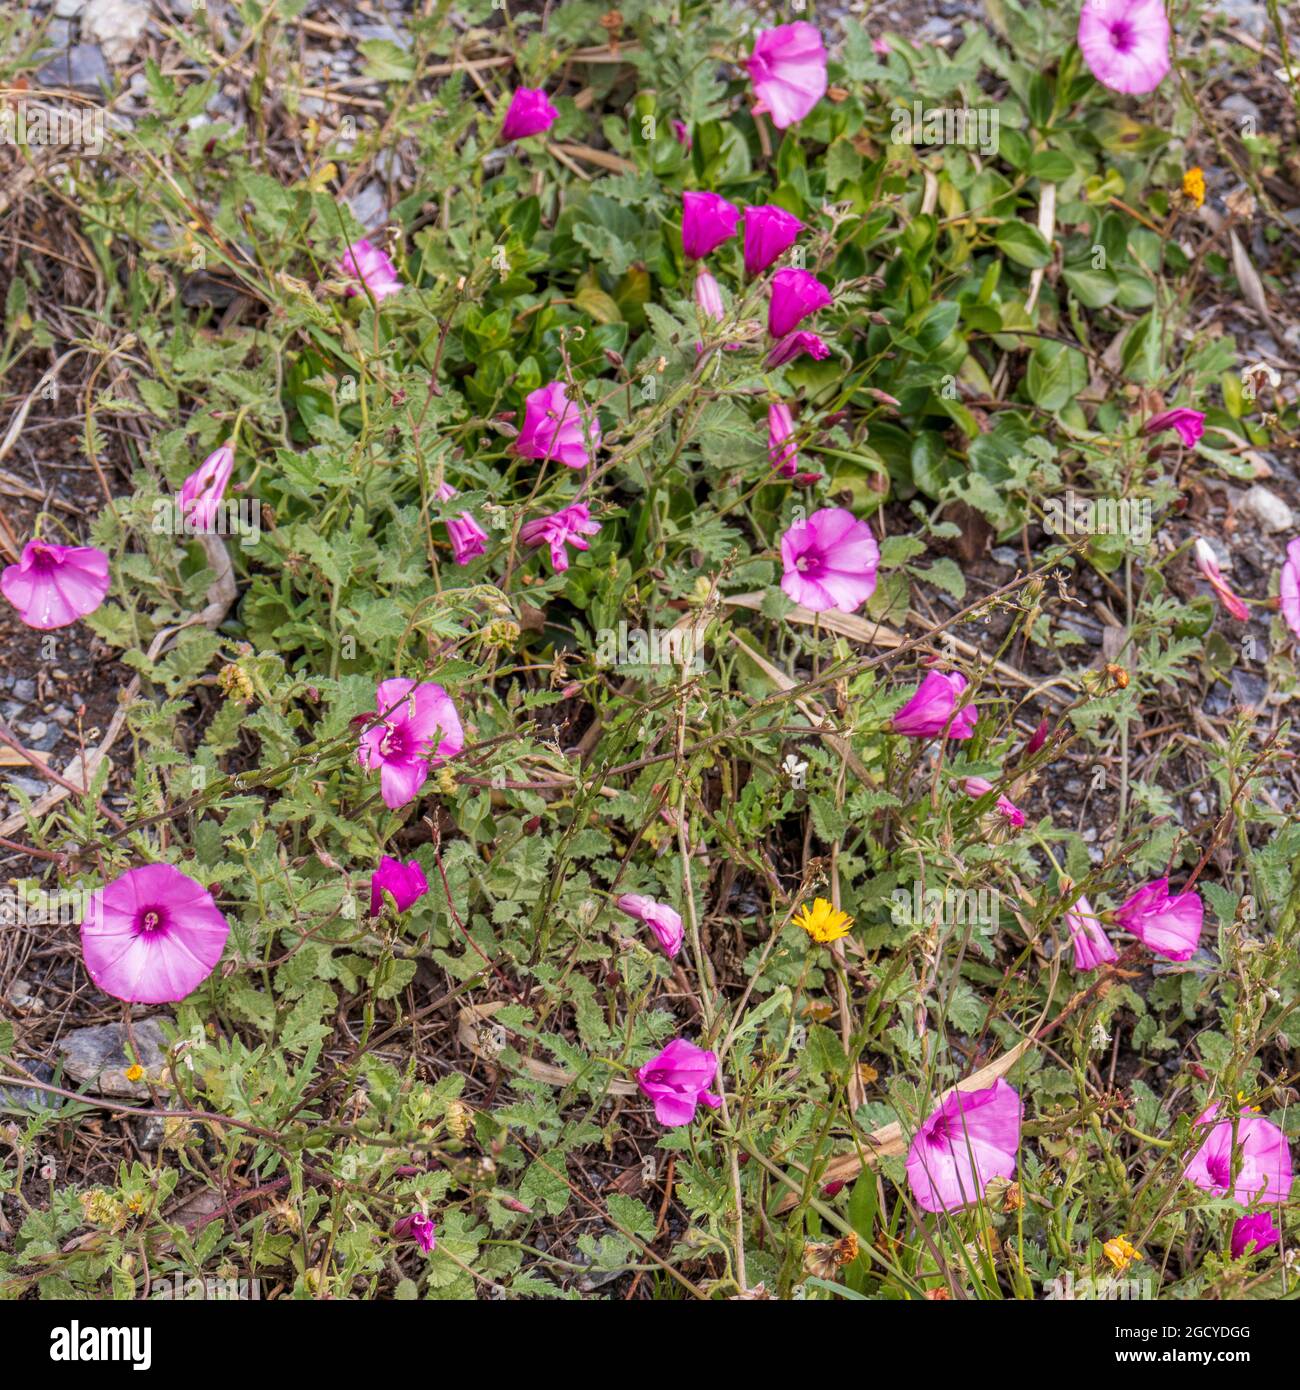 Convolvulus althaeoides, Pink Mallow Bindweed Flowers Stock Photo